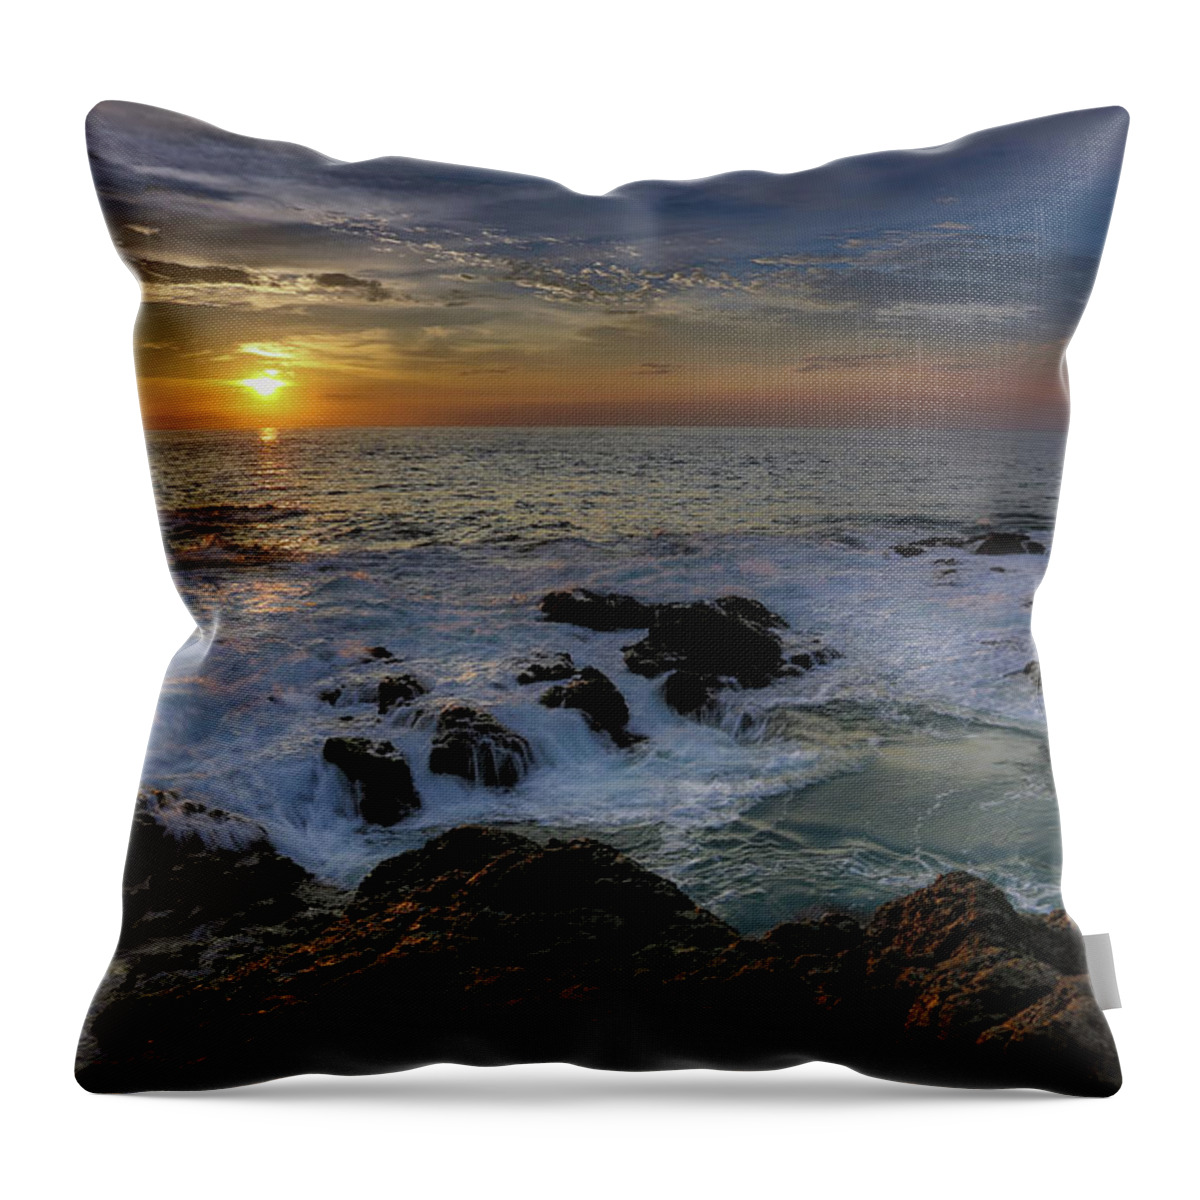 Costa Rica Throw Pillow featuring the photograph Costa Rica Sunrie by Dillon Kalkhurst